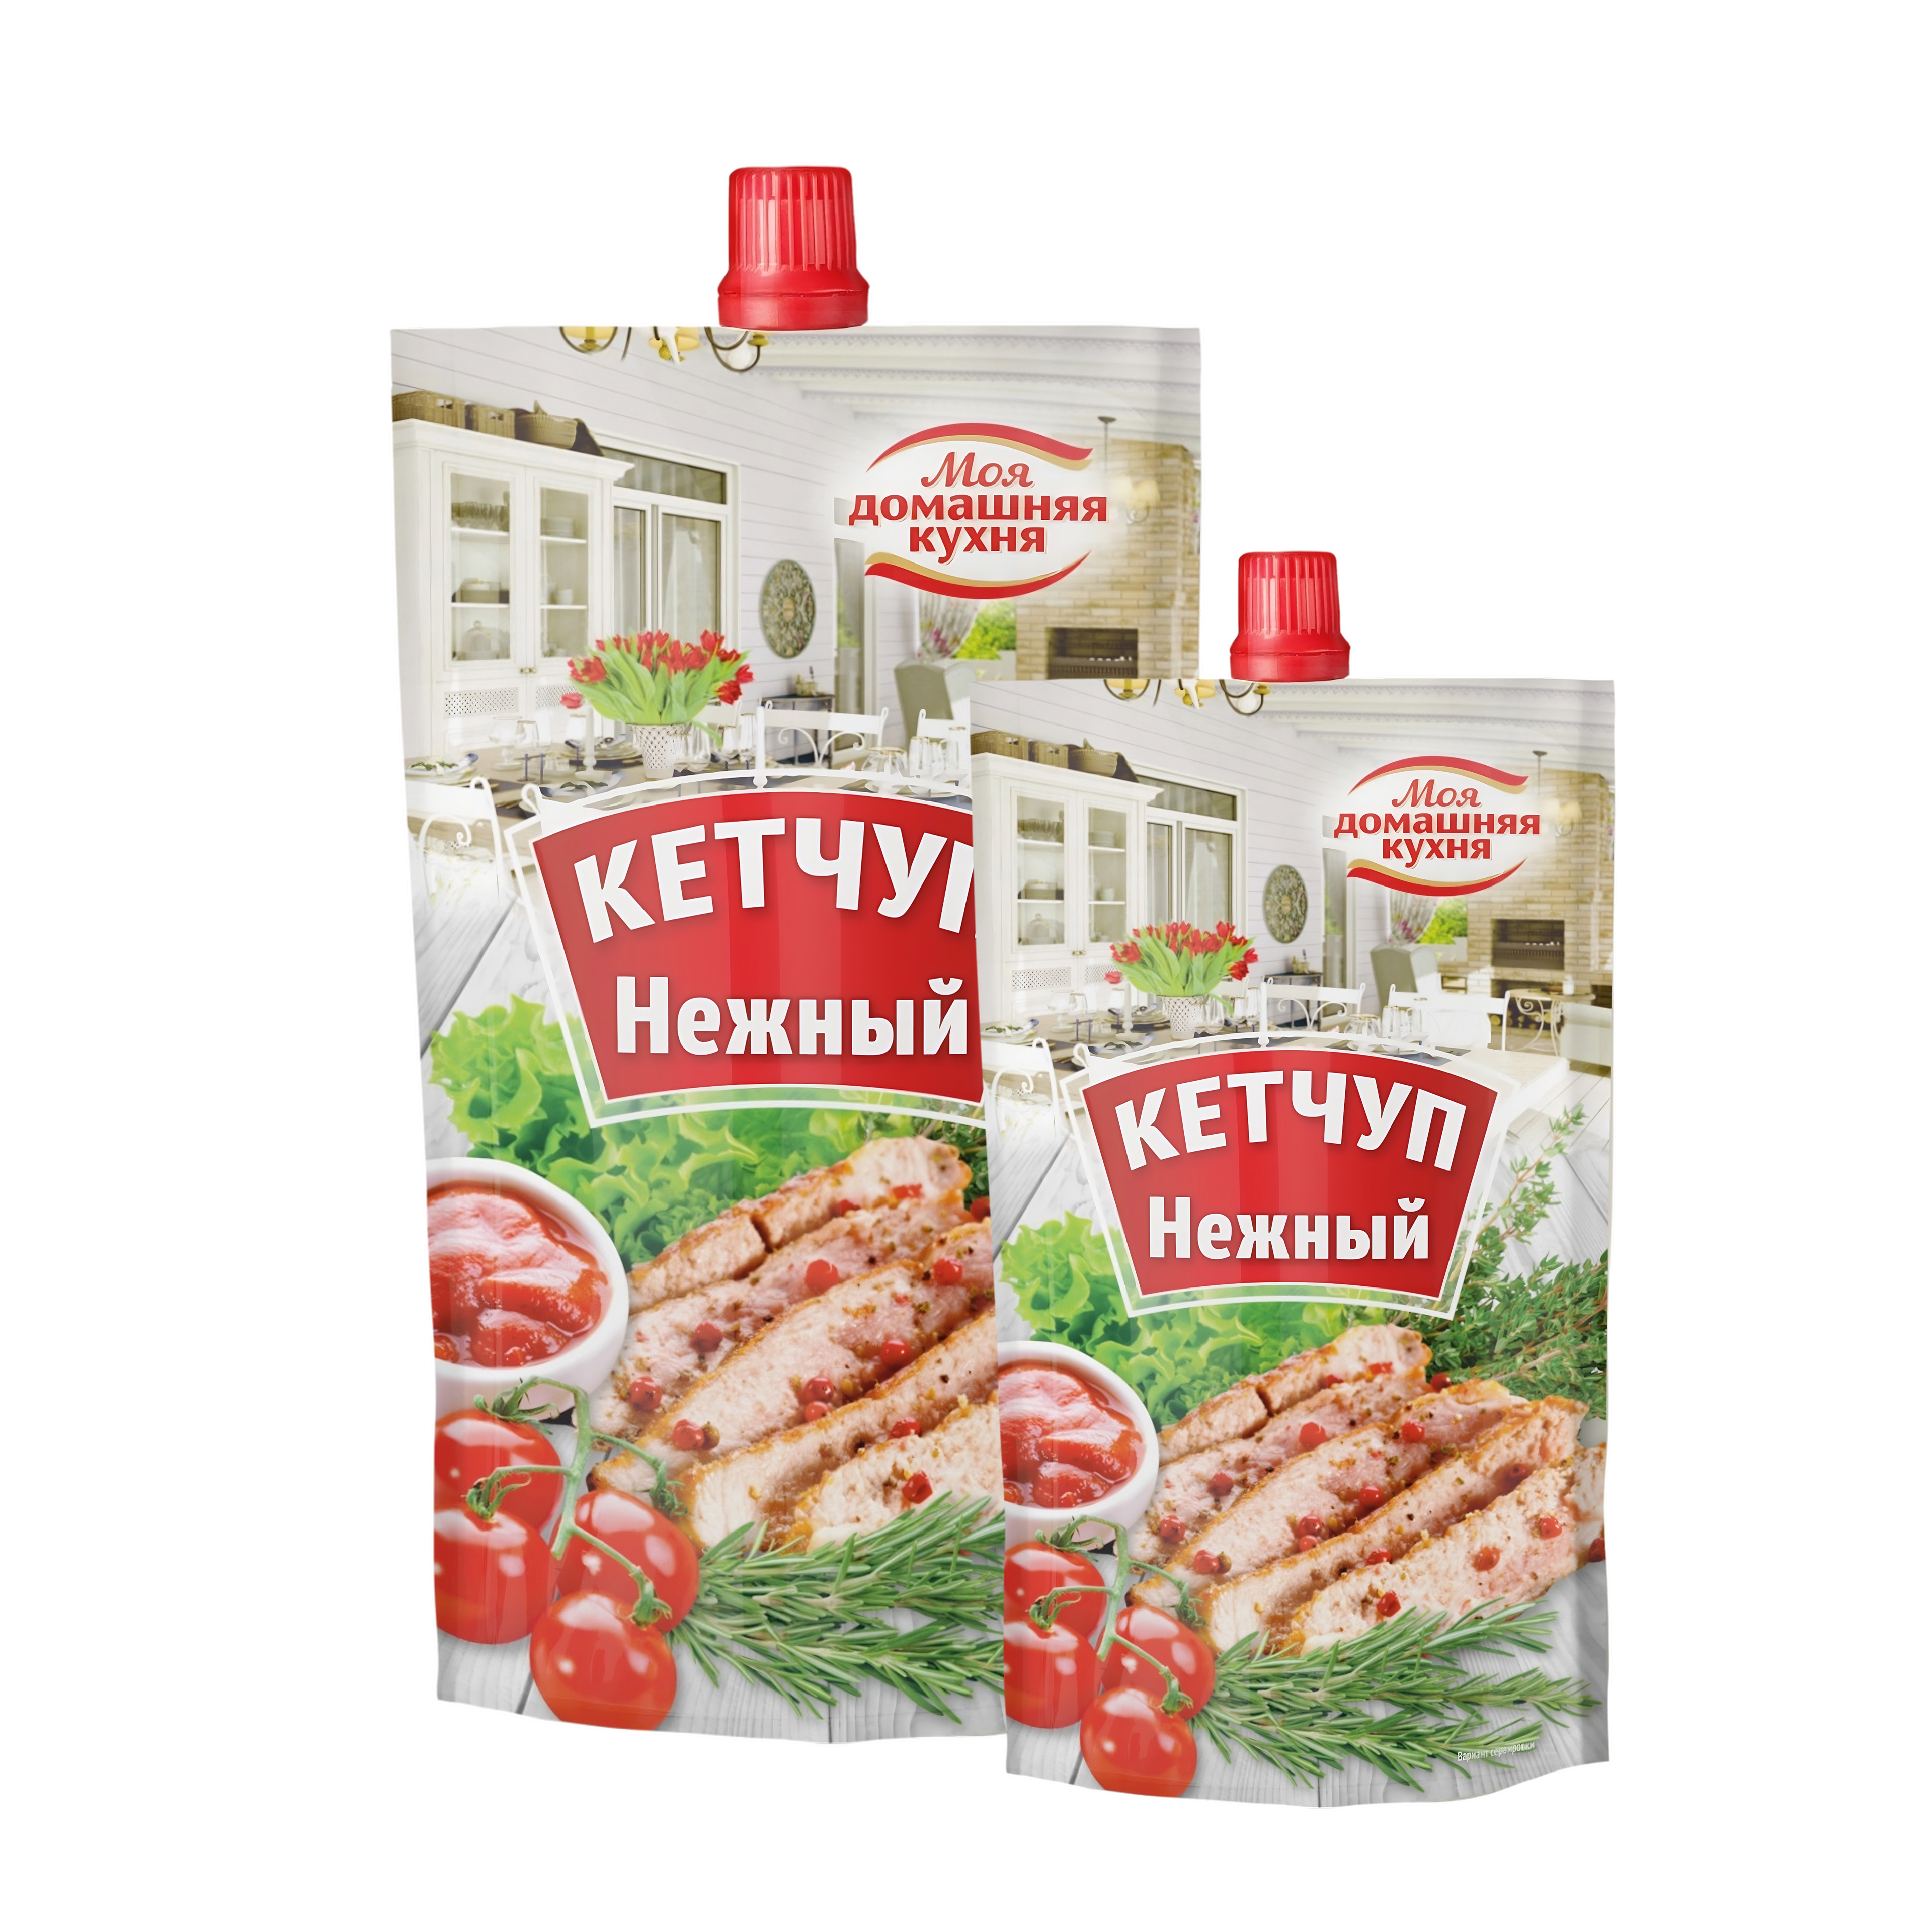 Ketchup Homemade delicate in bulk from GFF